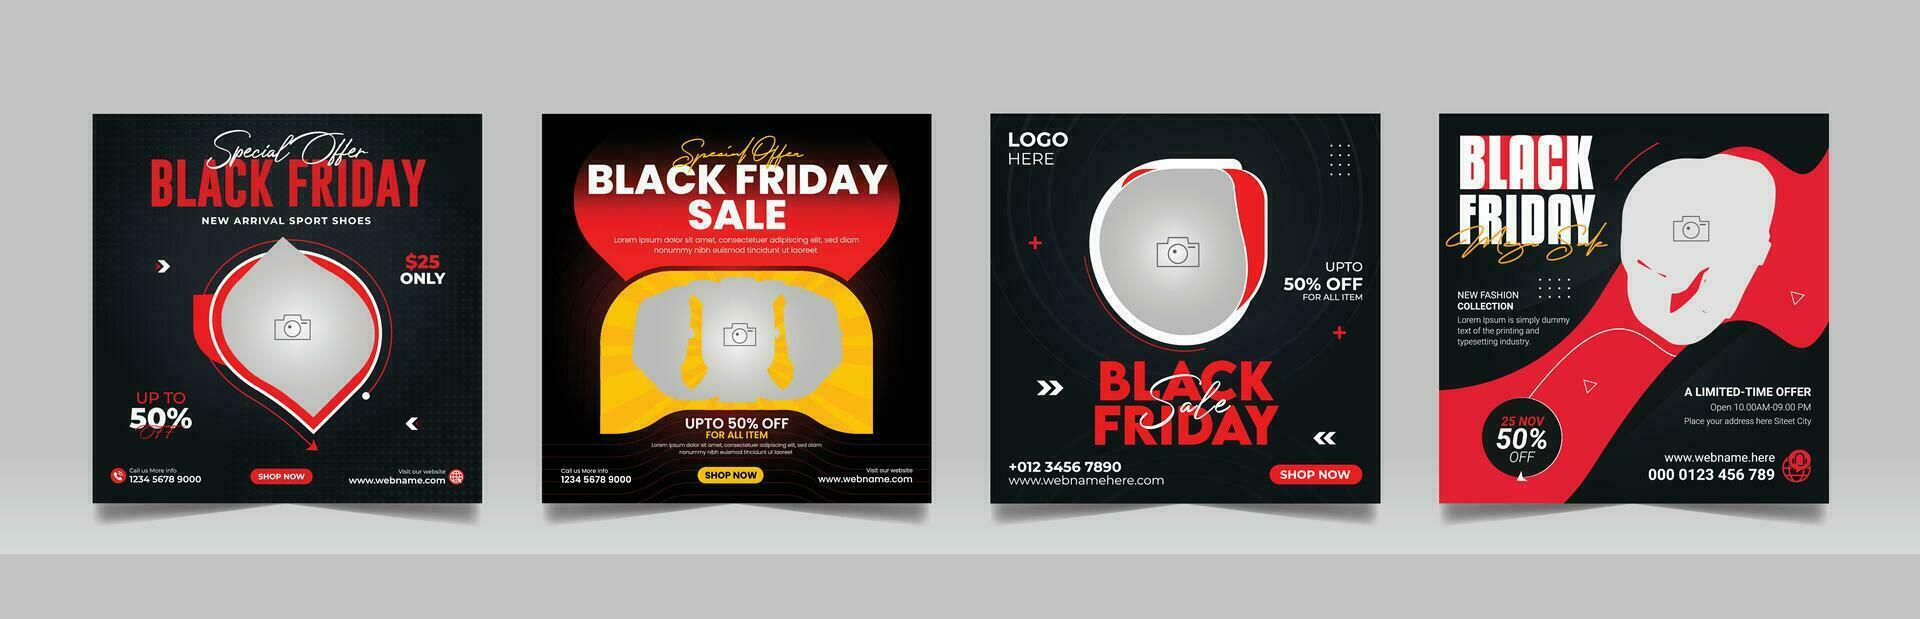 Black Friday discount sale banner product marketing social media post square flyer template set vector